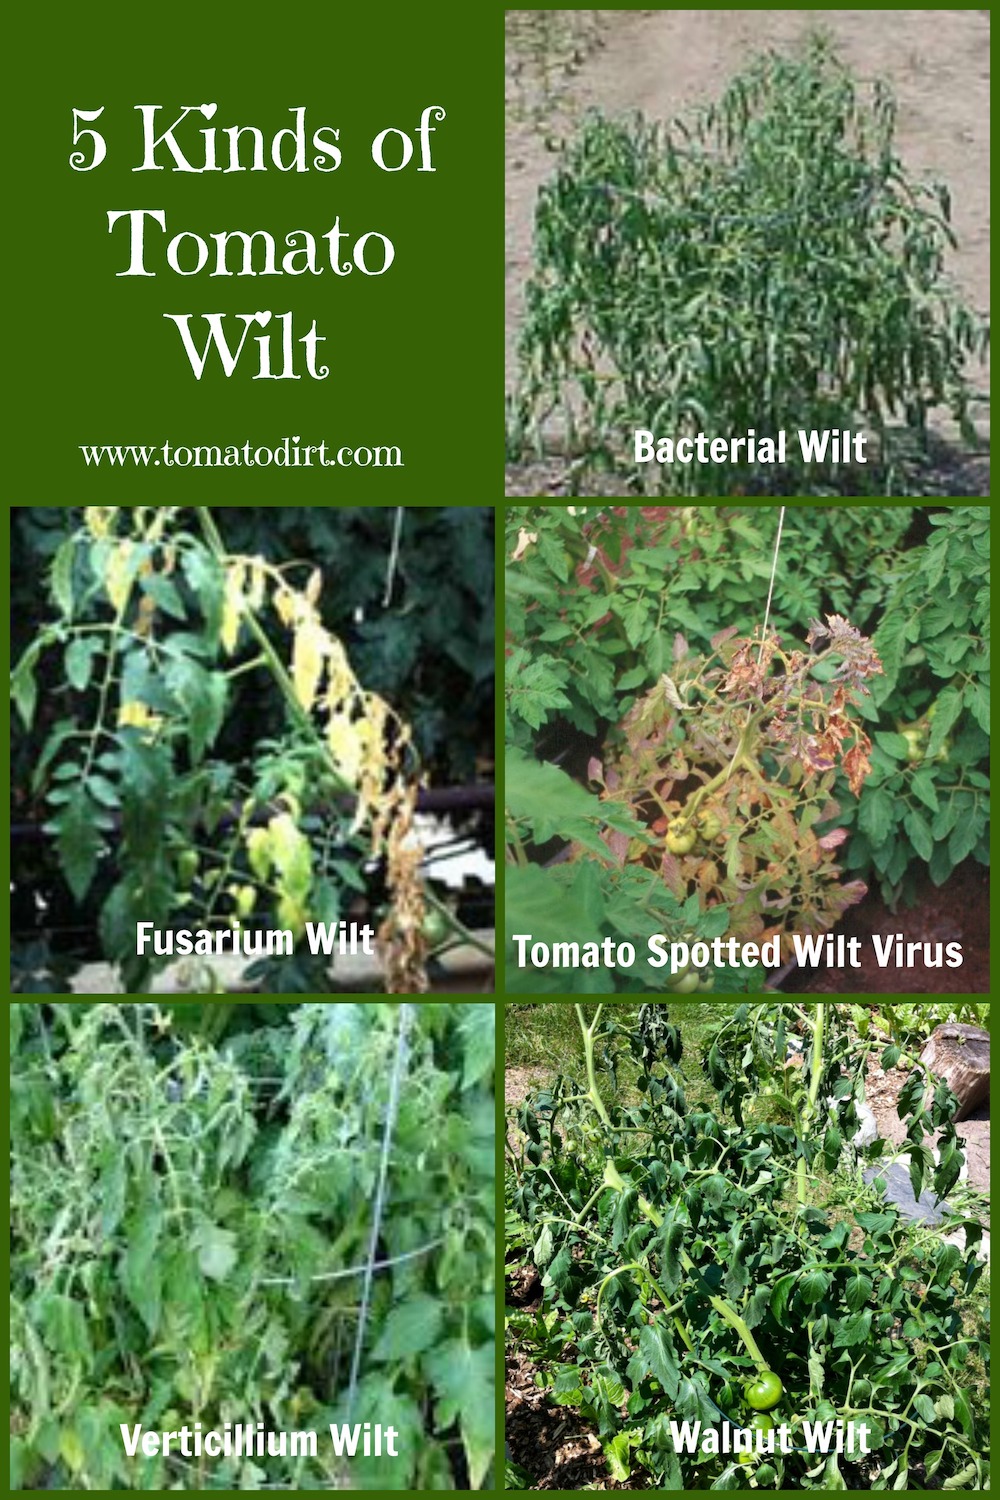 Compare 5 kinds of tomato wilt as you're identifying tomato diseases with Tomato Dirt